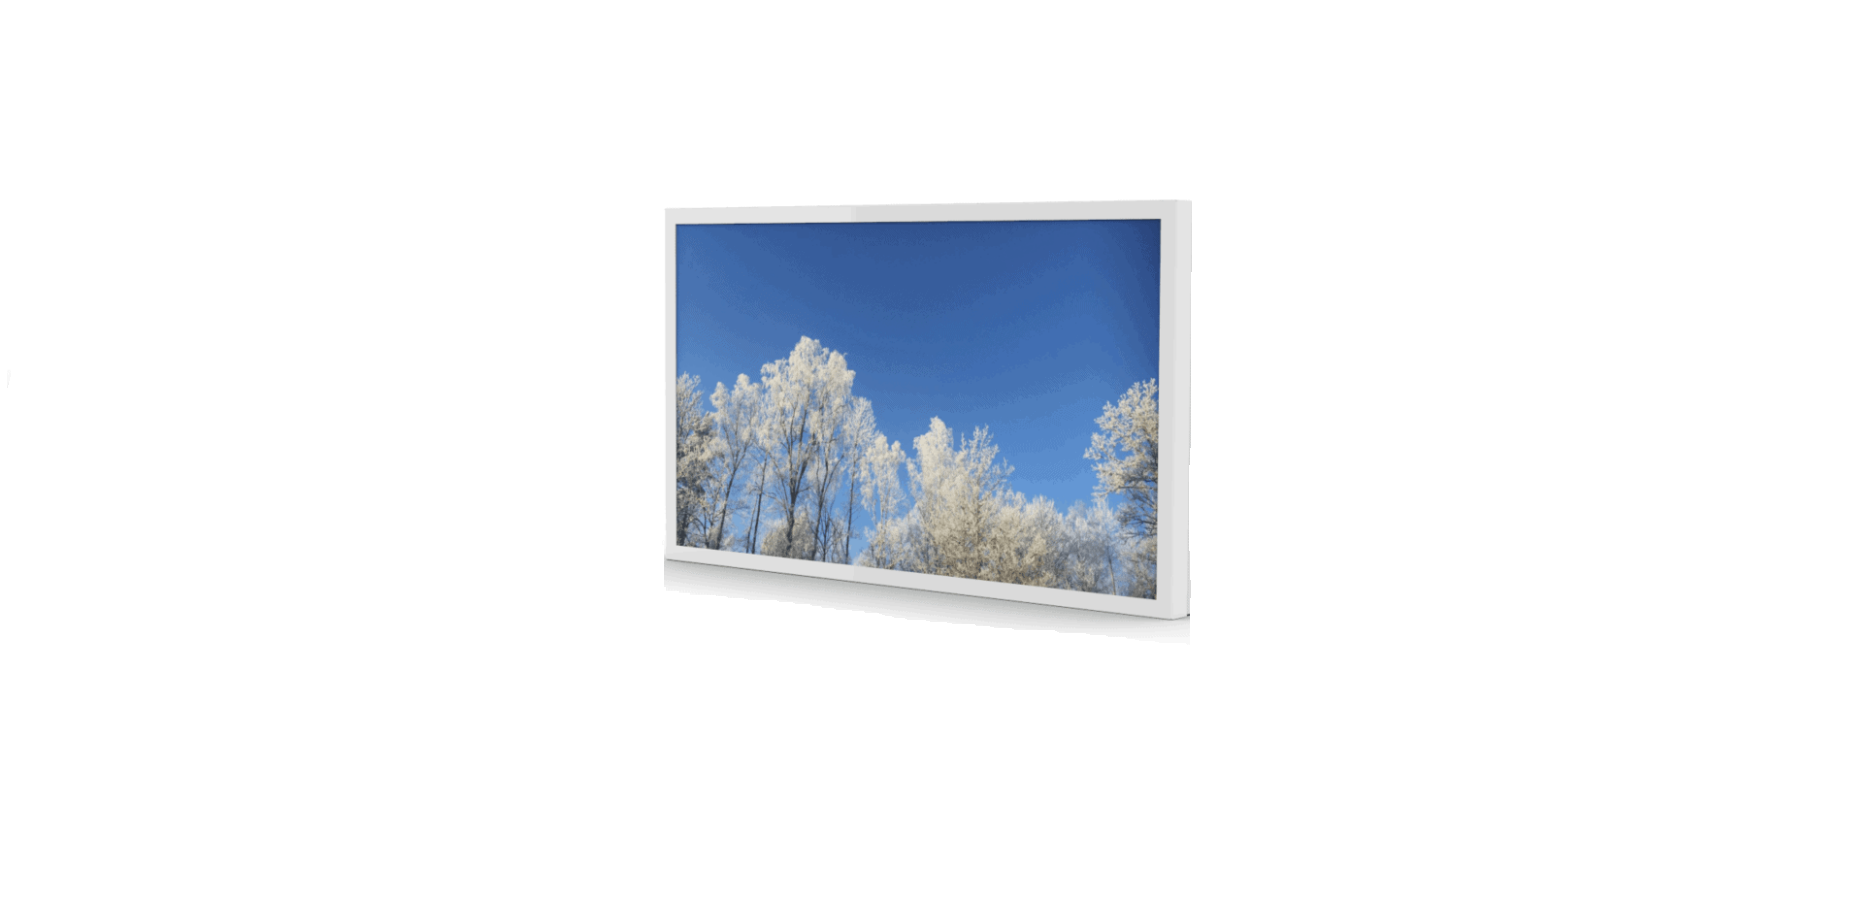 HI-ND 55 Inch Landscape Wall Casing Protect